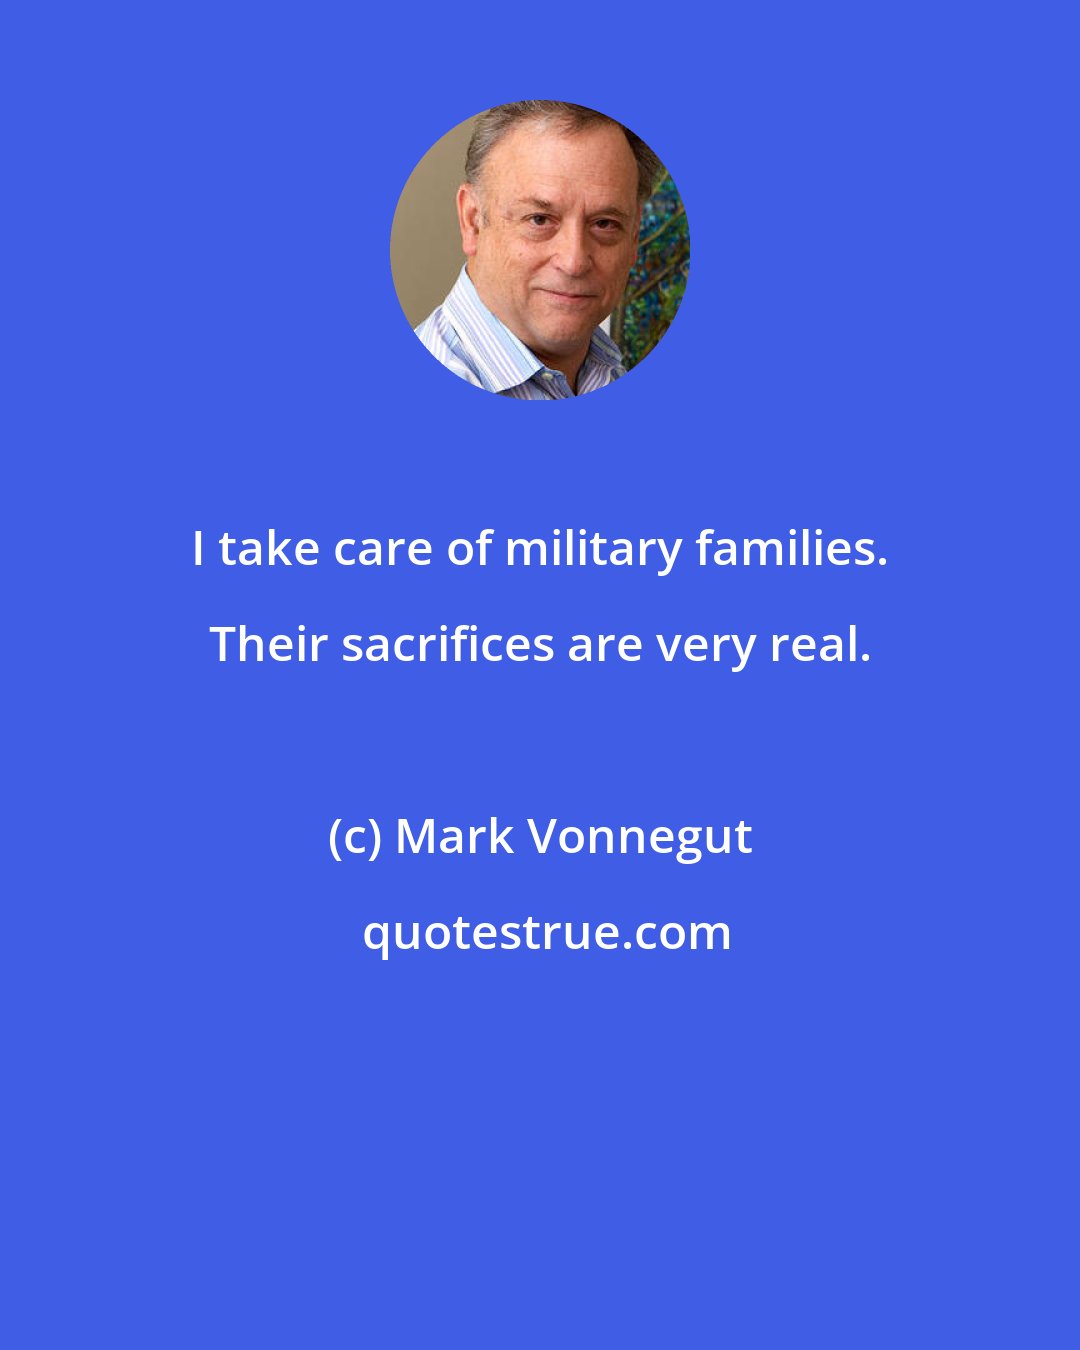 Mark Vonnegut: I take care of military families. Their sacrifices are very real.